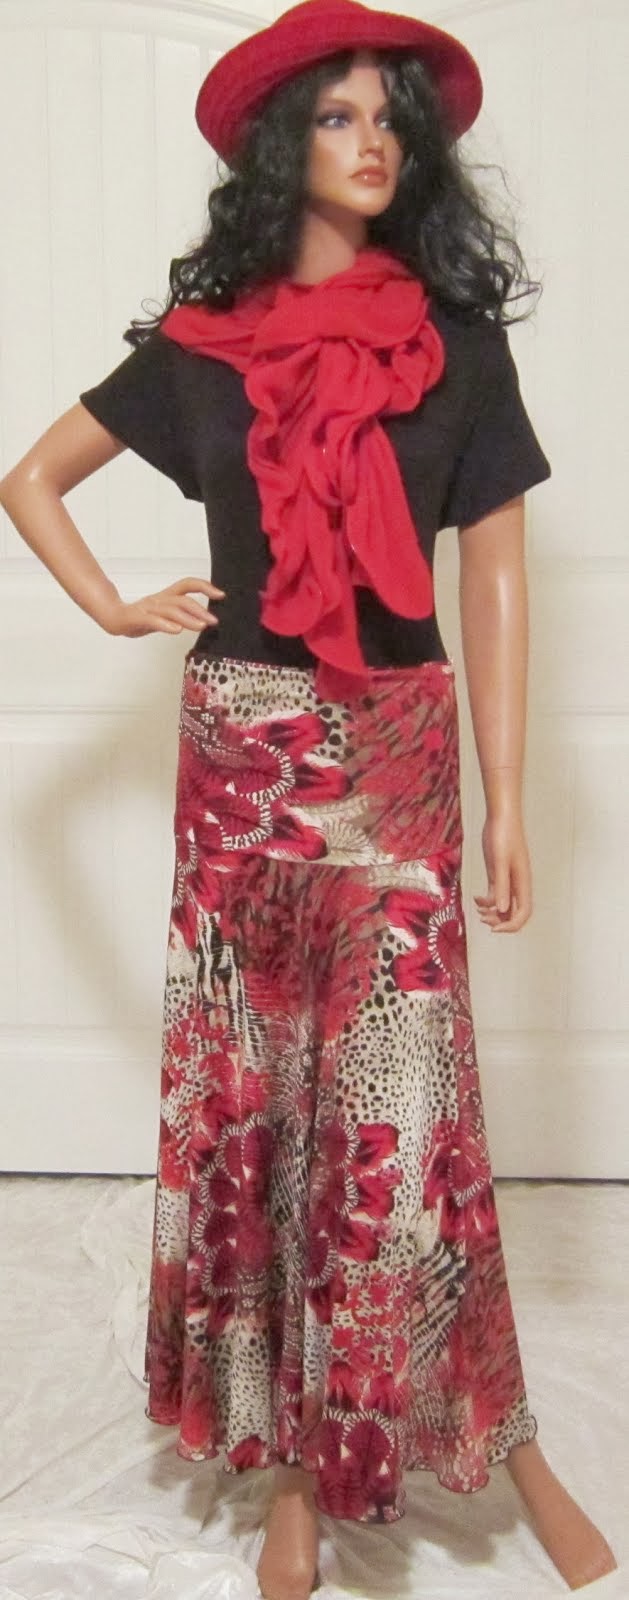 Abstract Red, Brown, black, and tan animal print stretch knit jersey maxi skirt